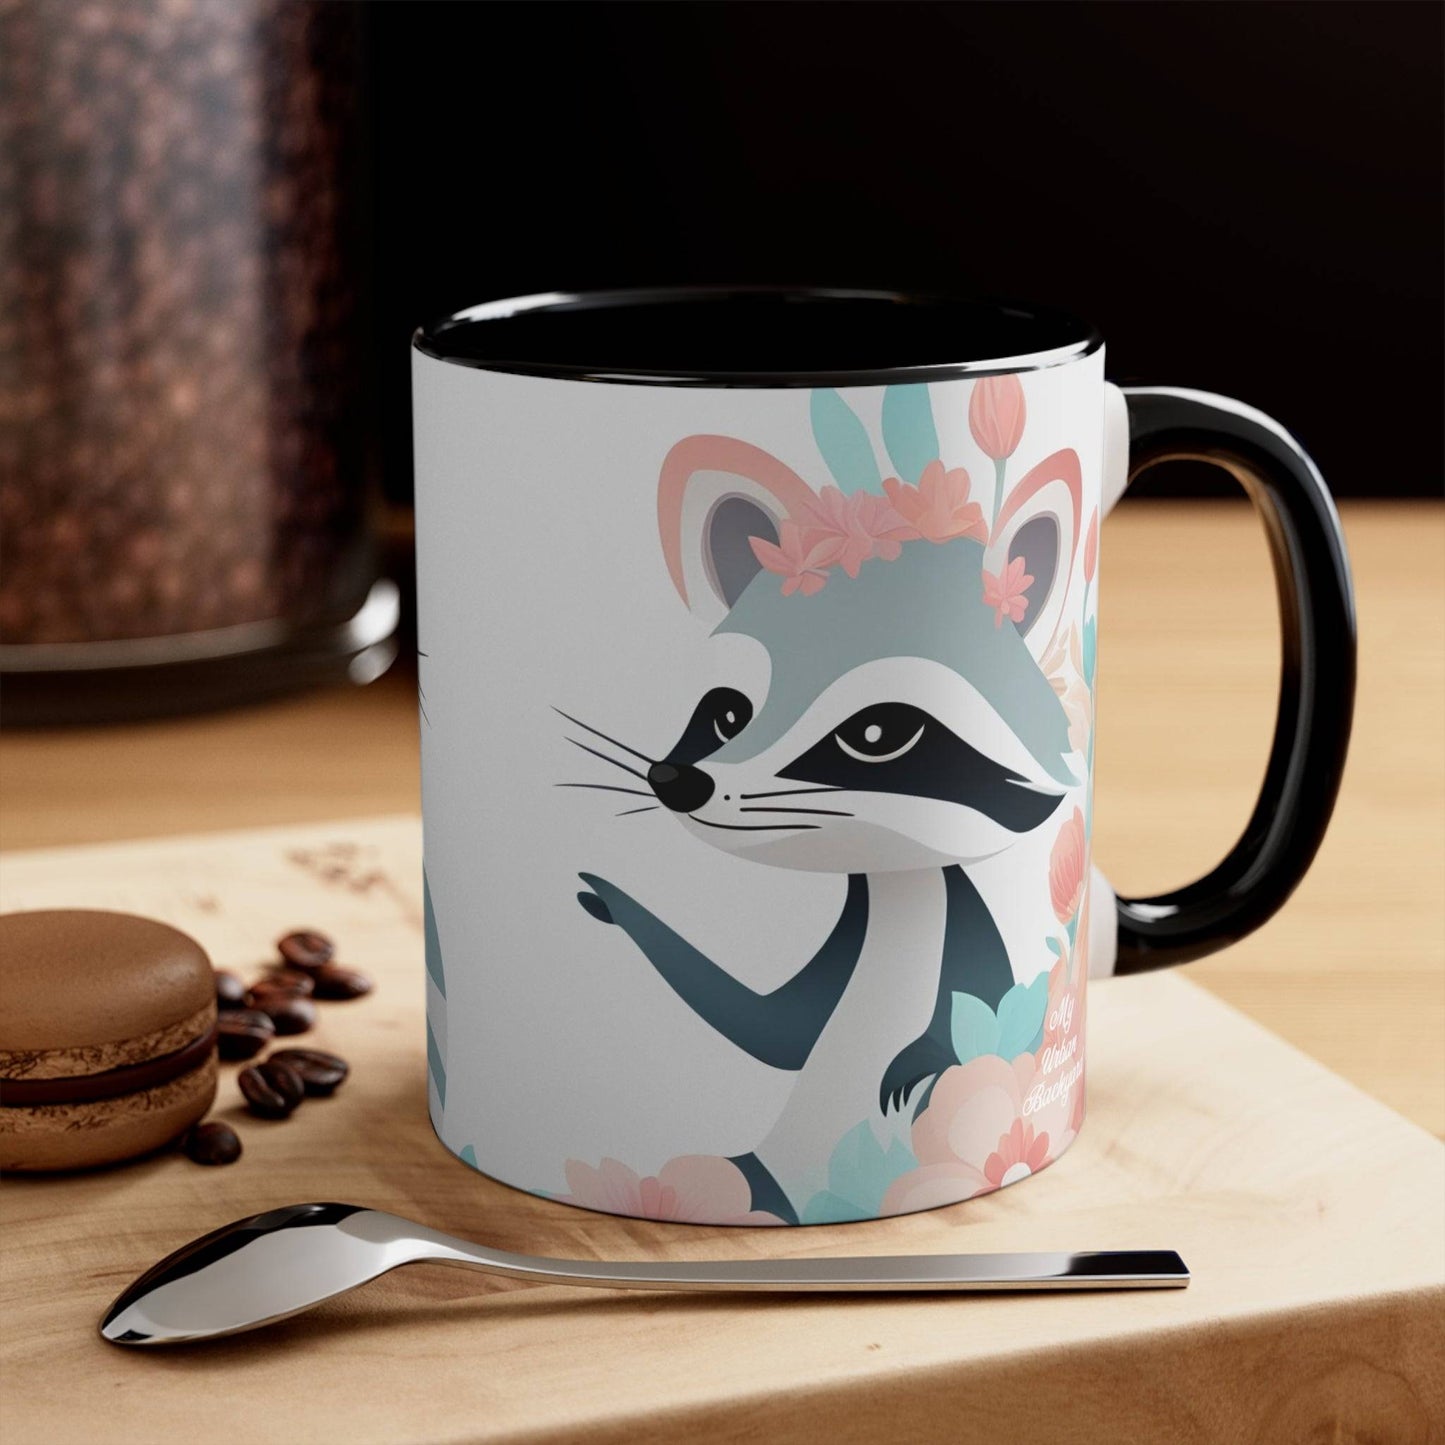 Ceramic Mug for Coffee, Tea, Hot Cocoa. Home/Office, Two Raccoons w Pastel Flowers